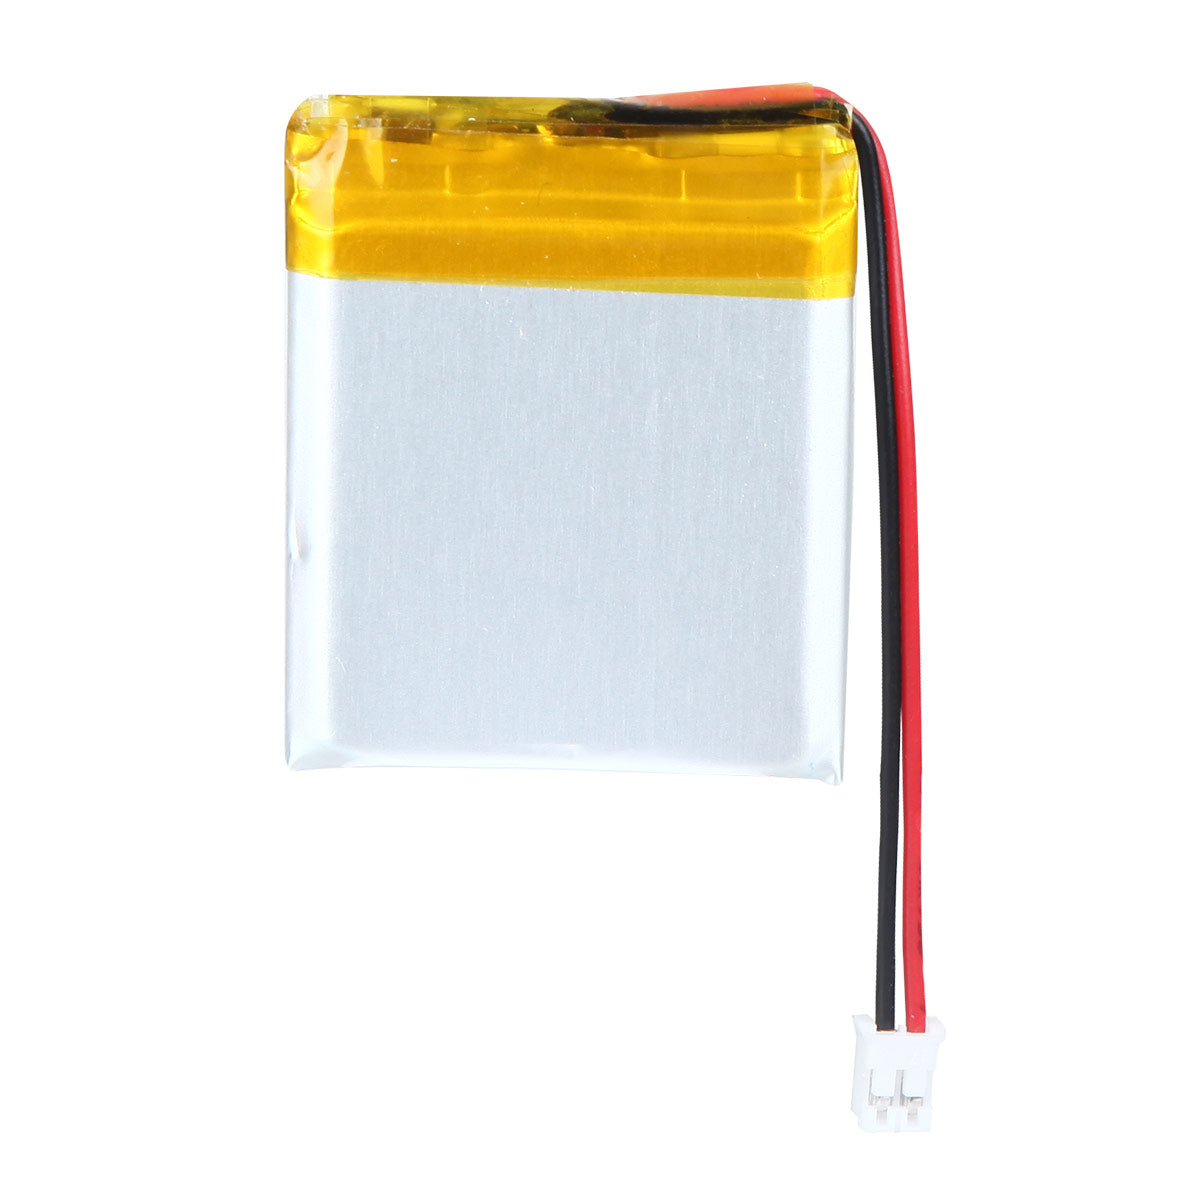 YDL 3.7V 700mAh 603035 Rechargeable Polymer Lithium-Ion Battery Length 37mm